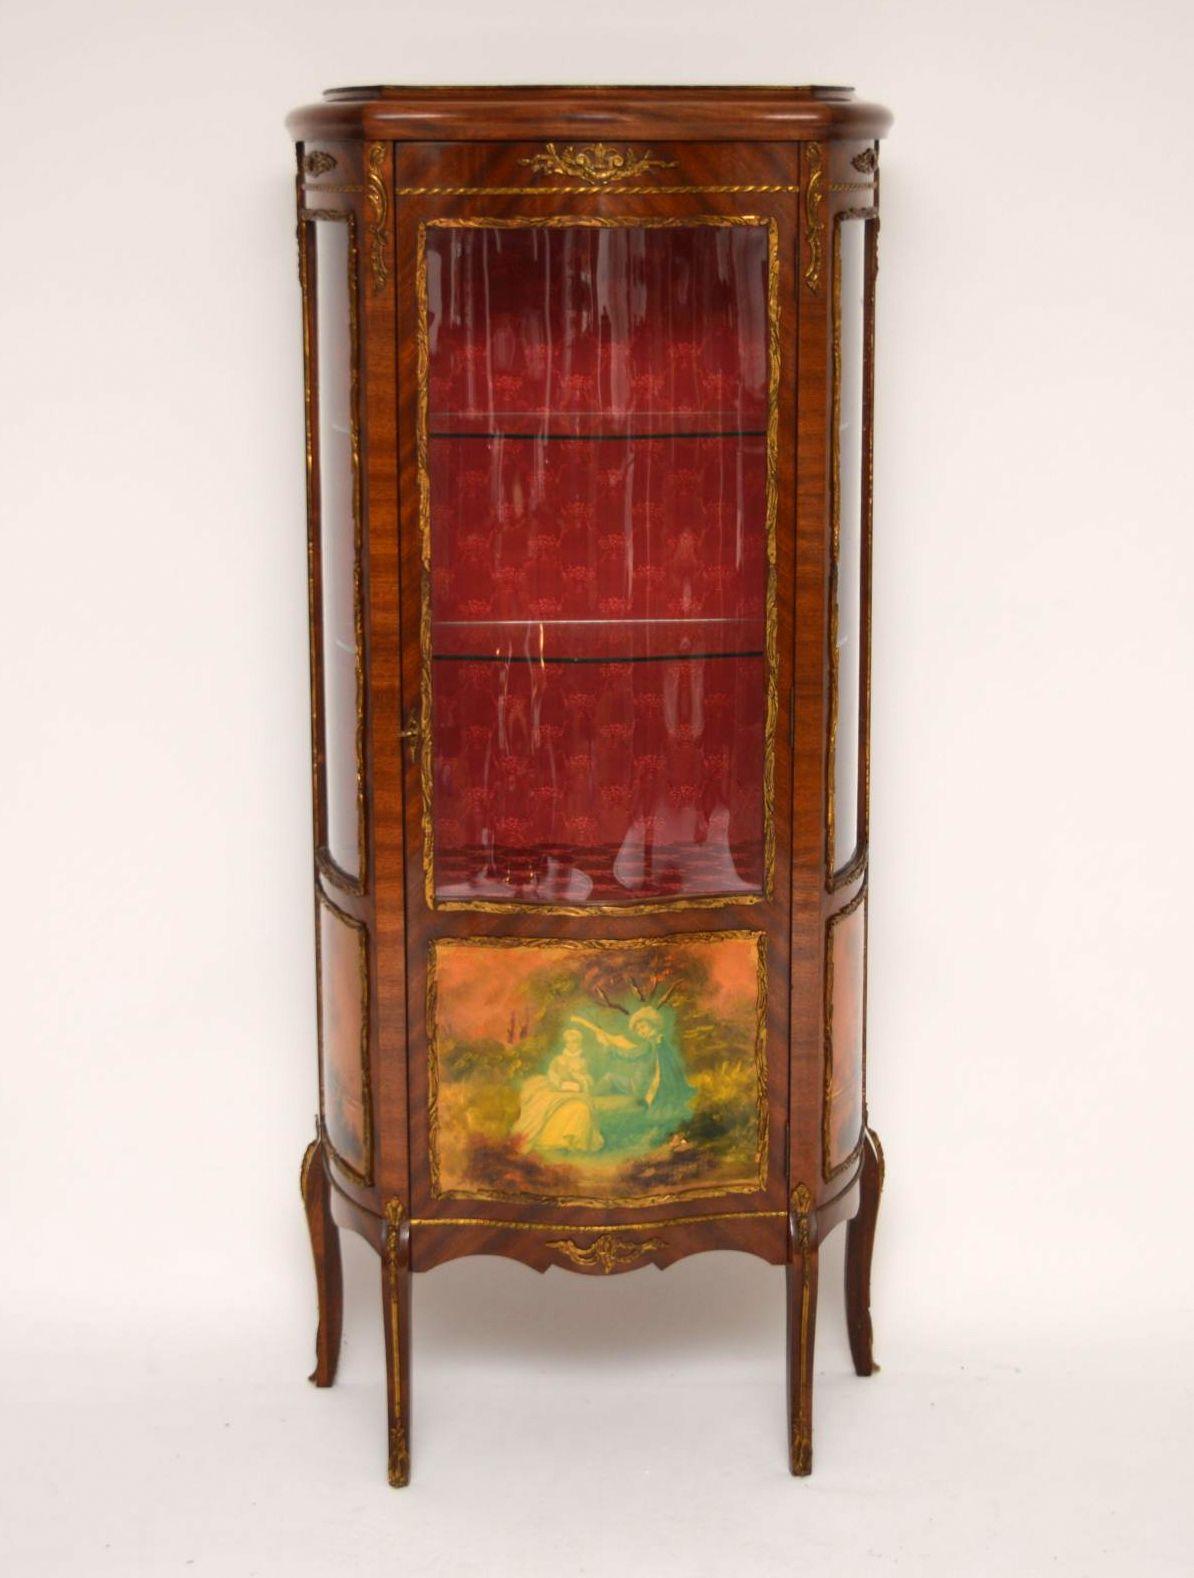 Antique French style serpentine fronted display cabinet of fairly small proportions, which I would date to 1930s-1950s period. It’s predominately mahogany, with three decorative panels & is mounted with gilt metal. This cabinet is in good original